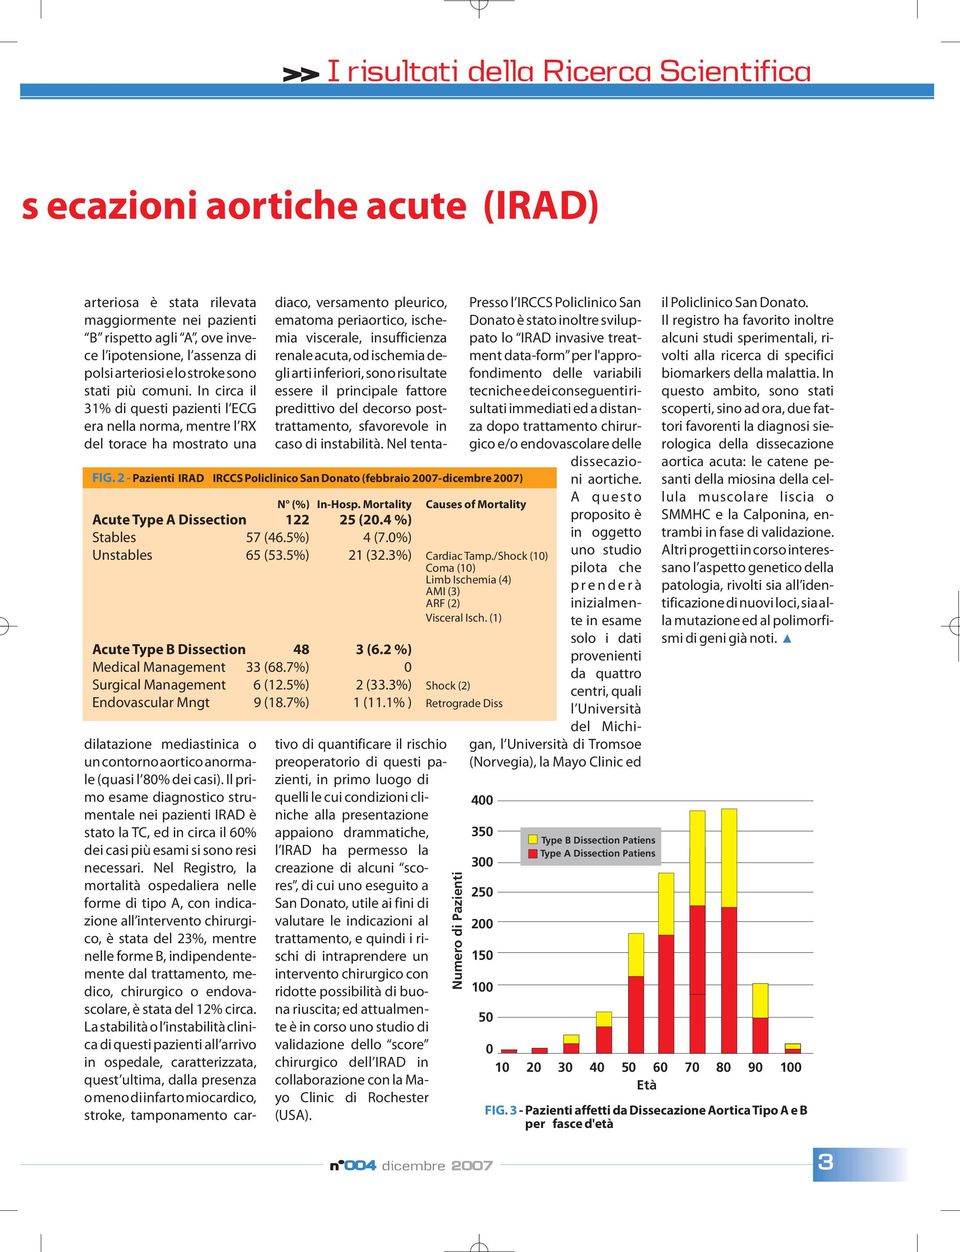 2 - Pazienti IRAD IRCCS Policlinico San Donato (febbraio 27-dicembre 27) N (%) In-Hosp. Mortality Causes of Mortality Acute Type A Dissection 122 25 (2.4 %) Stables 57 (46.5%) 4 (7.